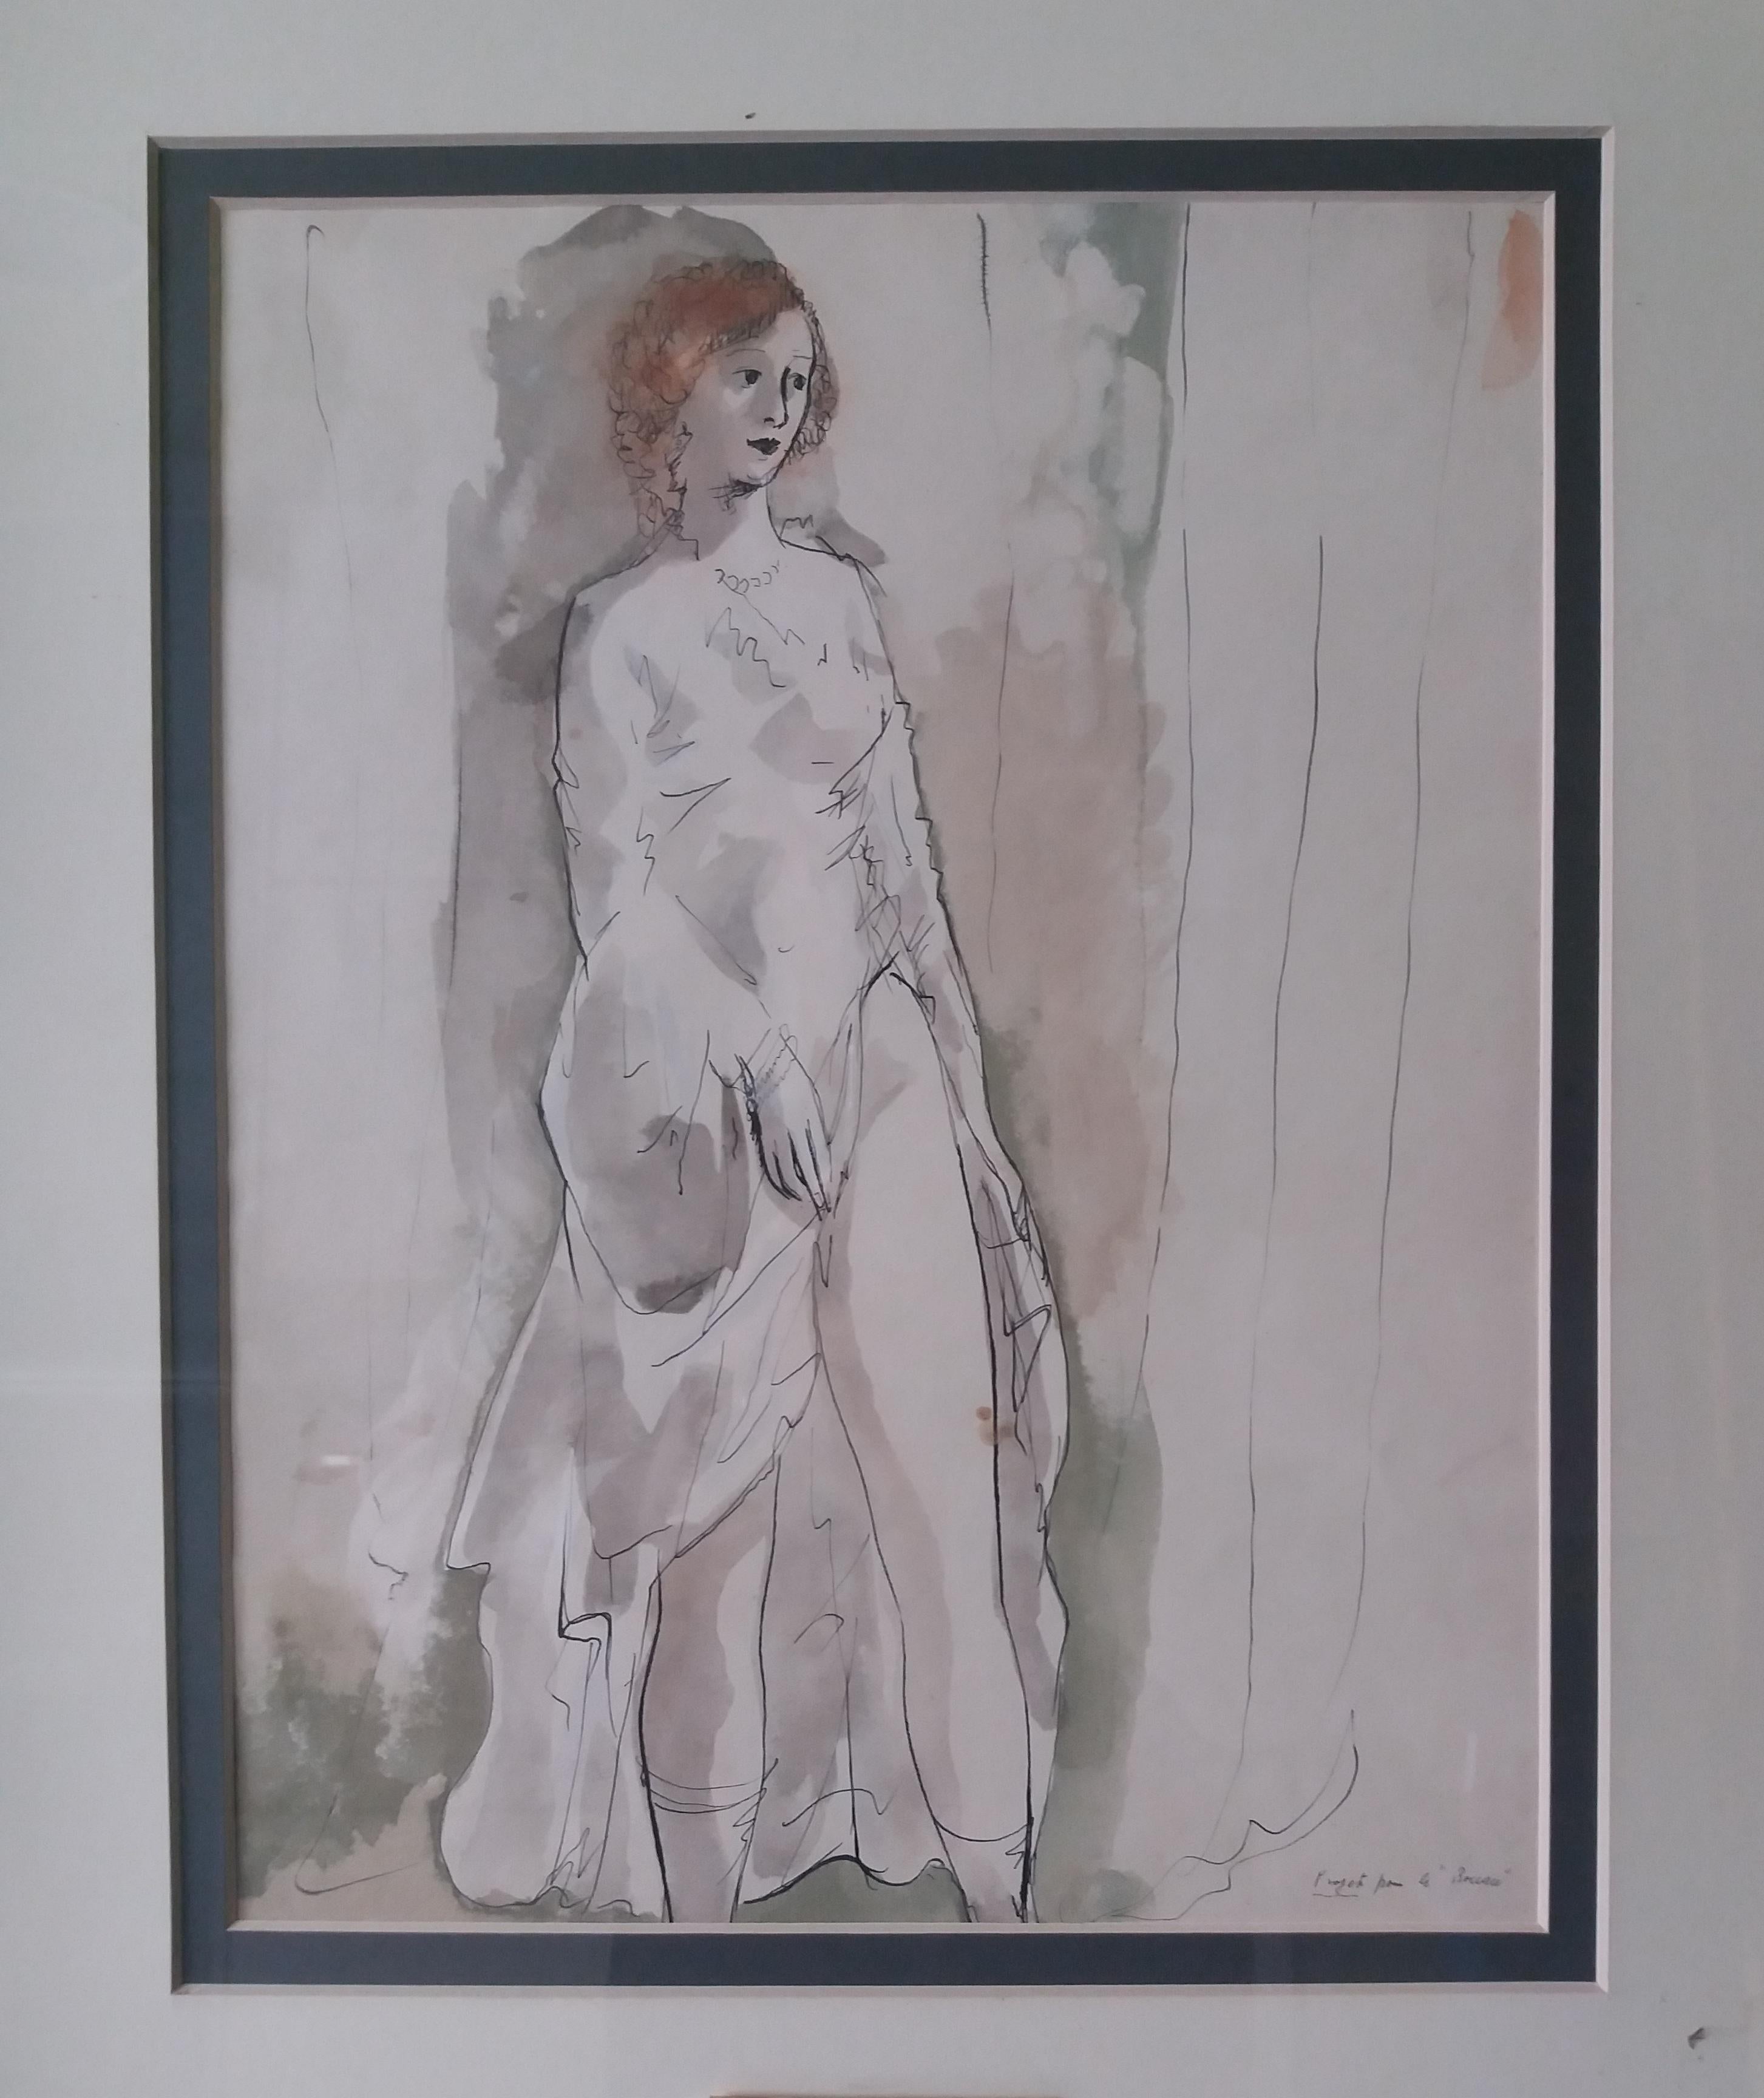  Pruna 6 Women Sketch for Bocaccio original watercolor painting - Expressionist Painting by Pere Pruna y Ocerans